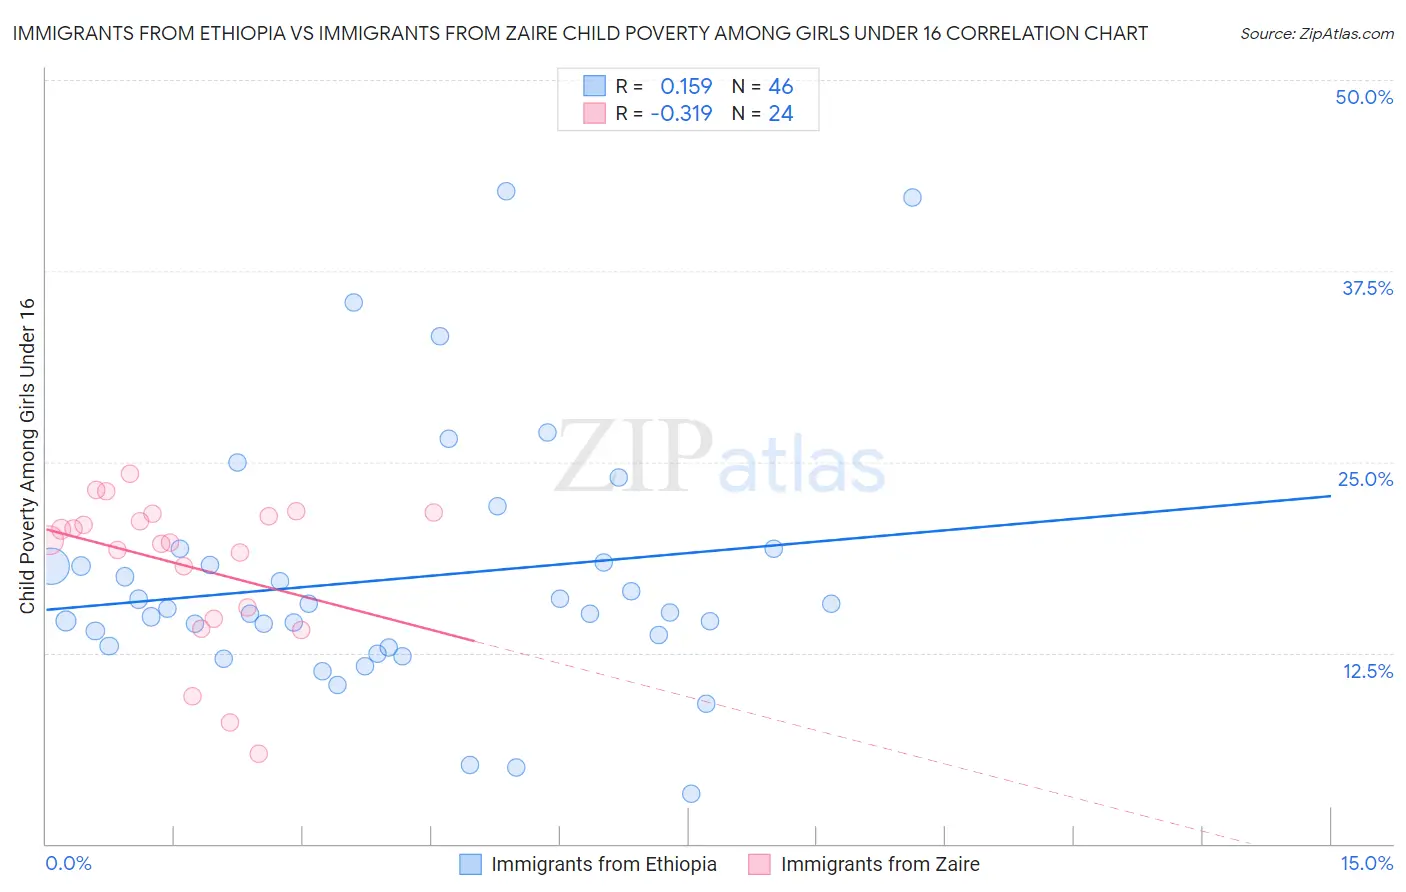 Immigrants from Ethiopia vs Immigrants from Zaire Child Poverty Among Girls Under 16